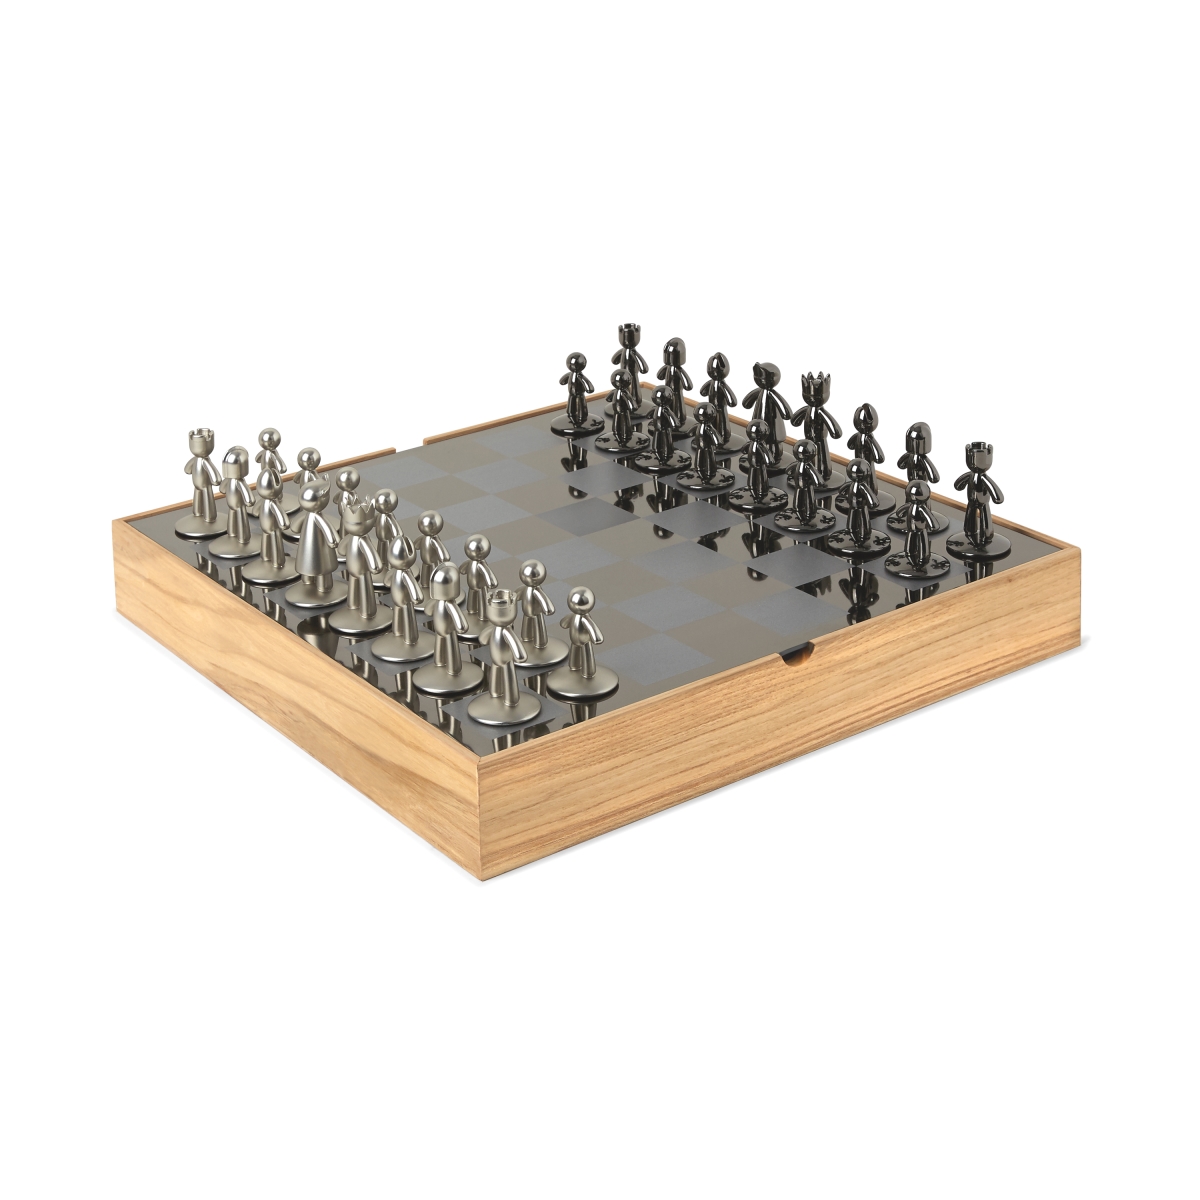 1005304-390 Buddy Chess Set For Kids & Adults, 33 X 33 X 3.8 Cm - Natural